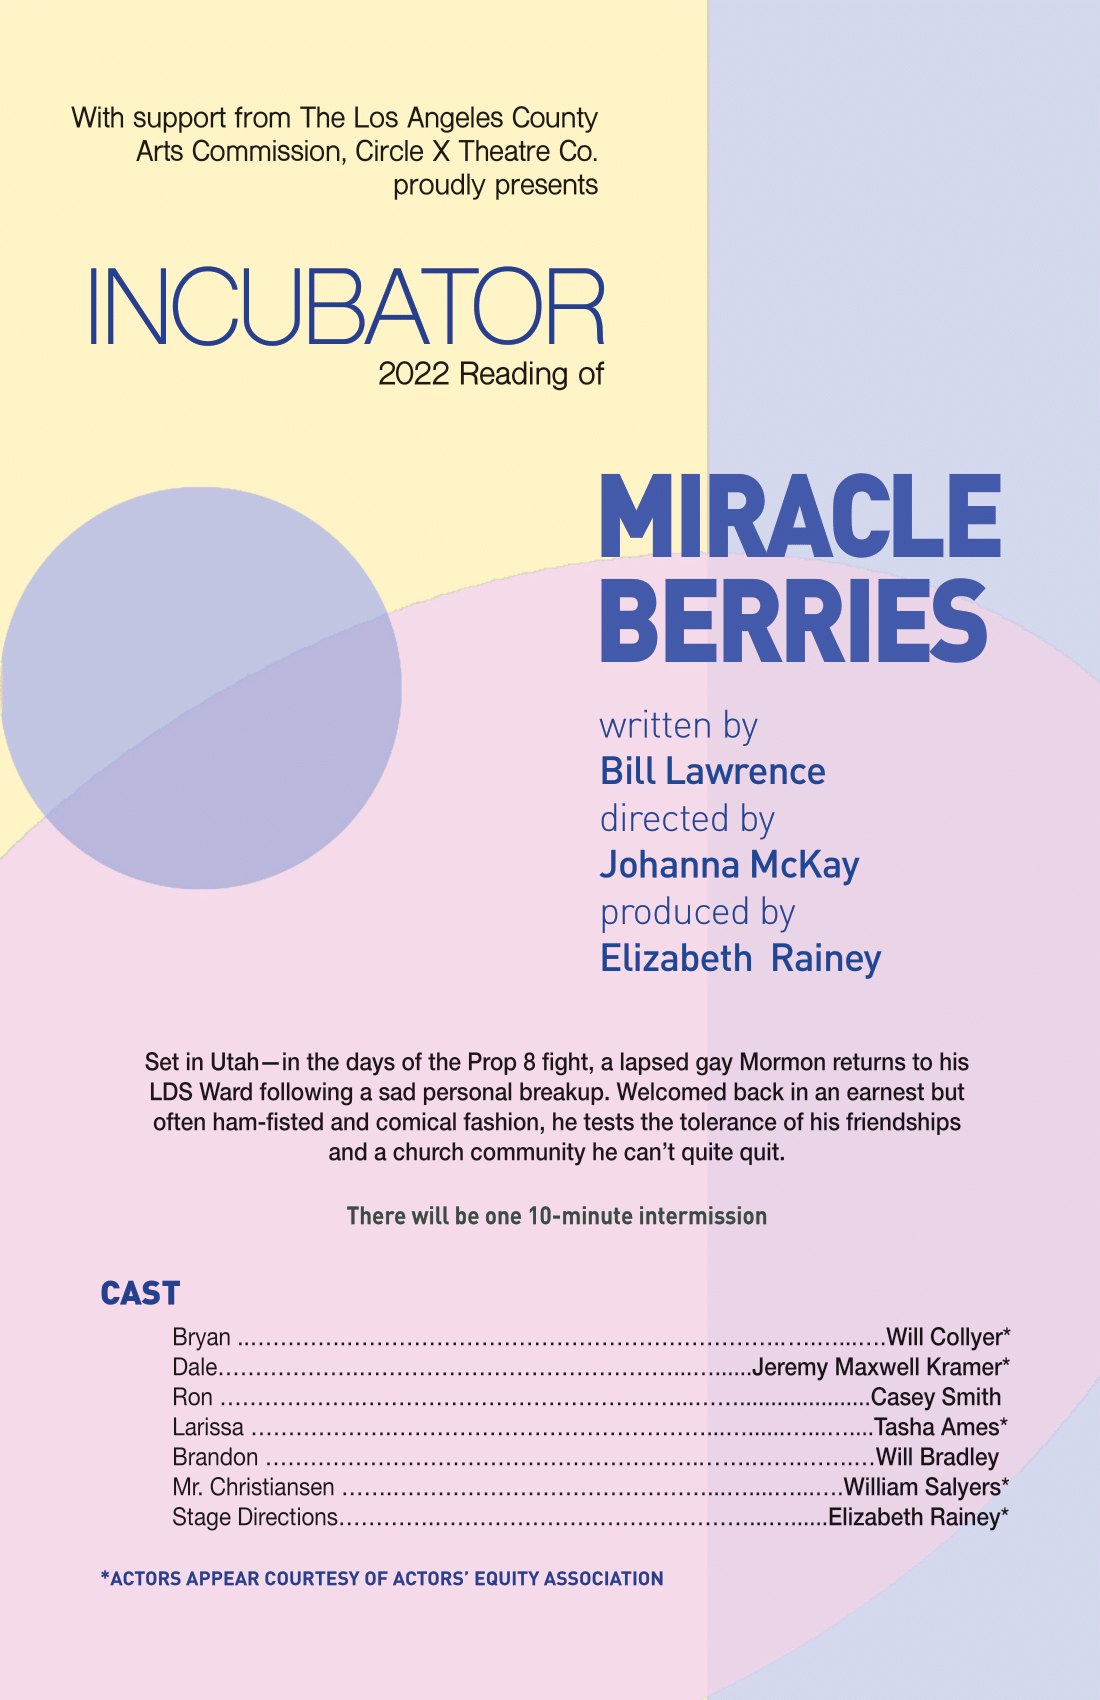 Incubator_MiracleBerries_progADD-2.png